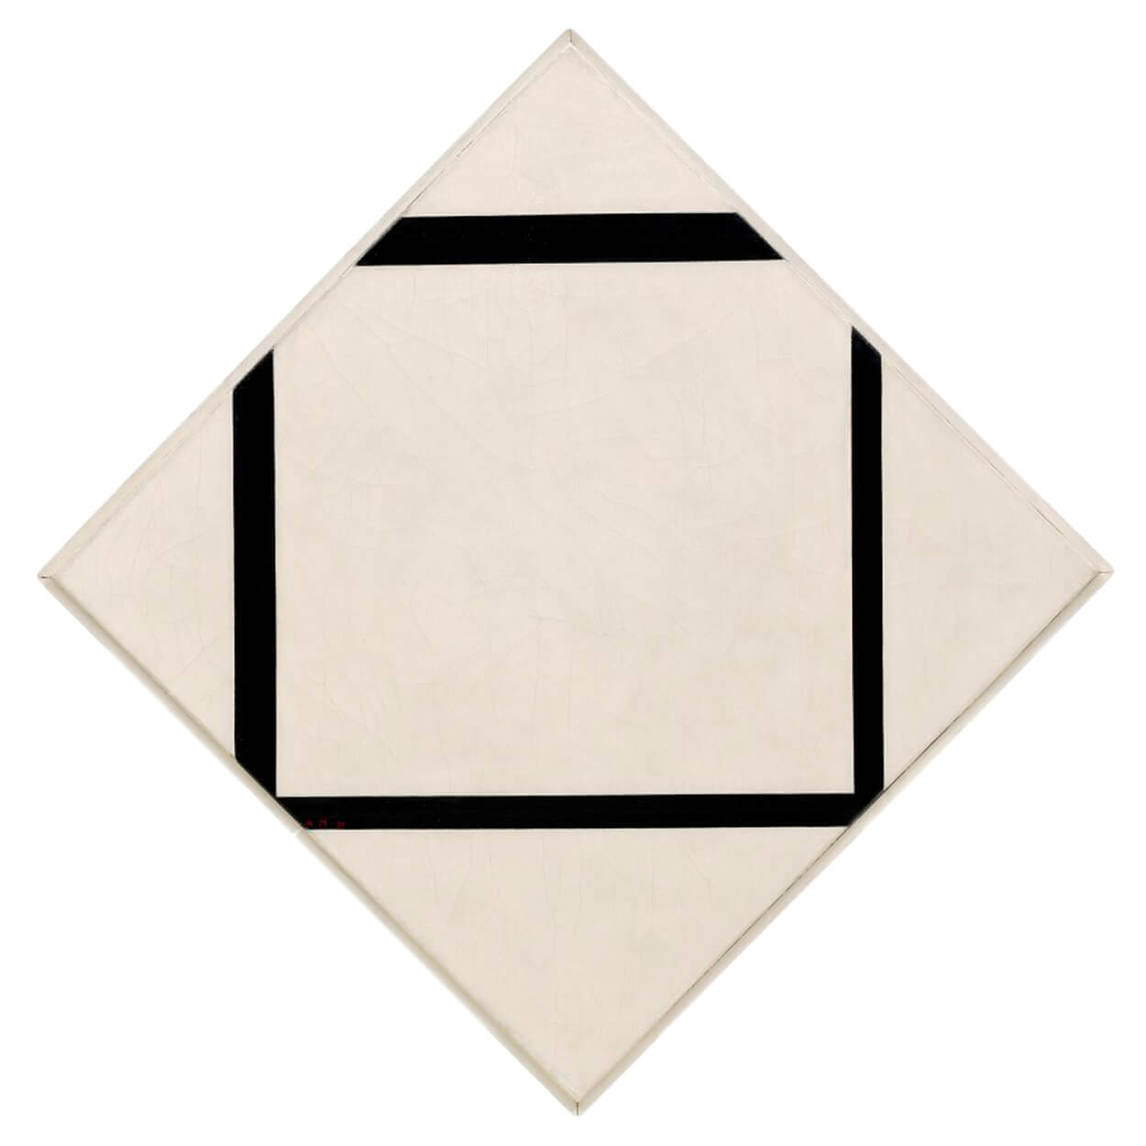 Composition No. 1 Lozenge with Four Lines, 1930, by Piet Mondrian